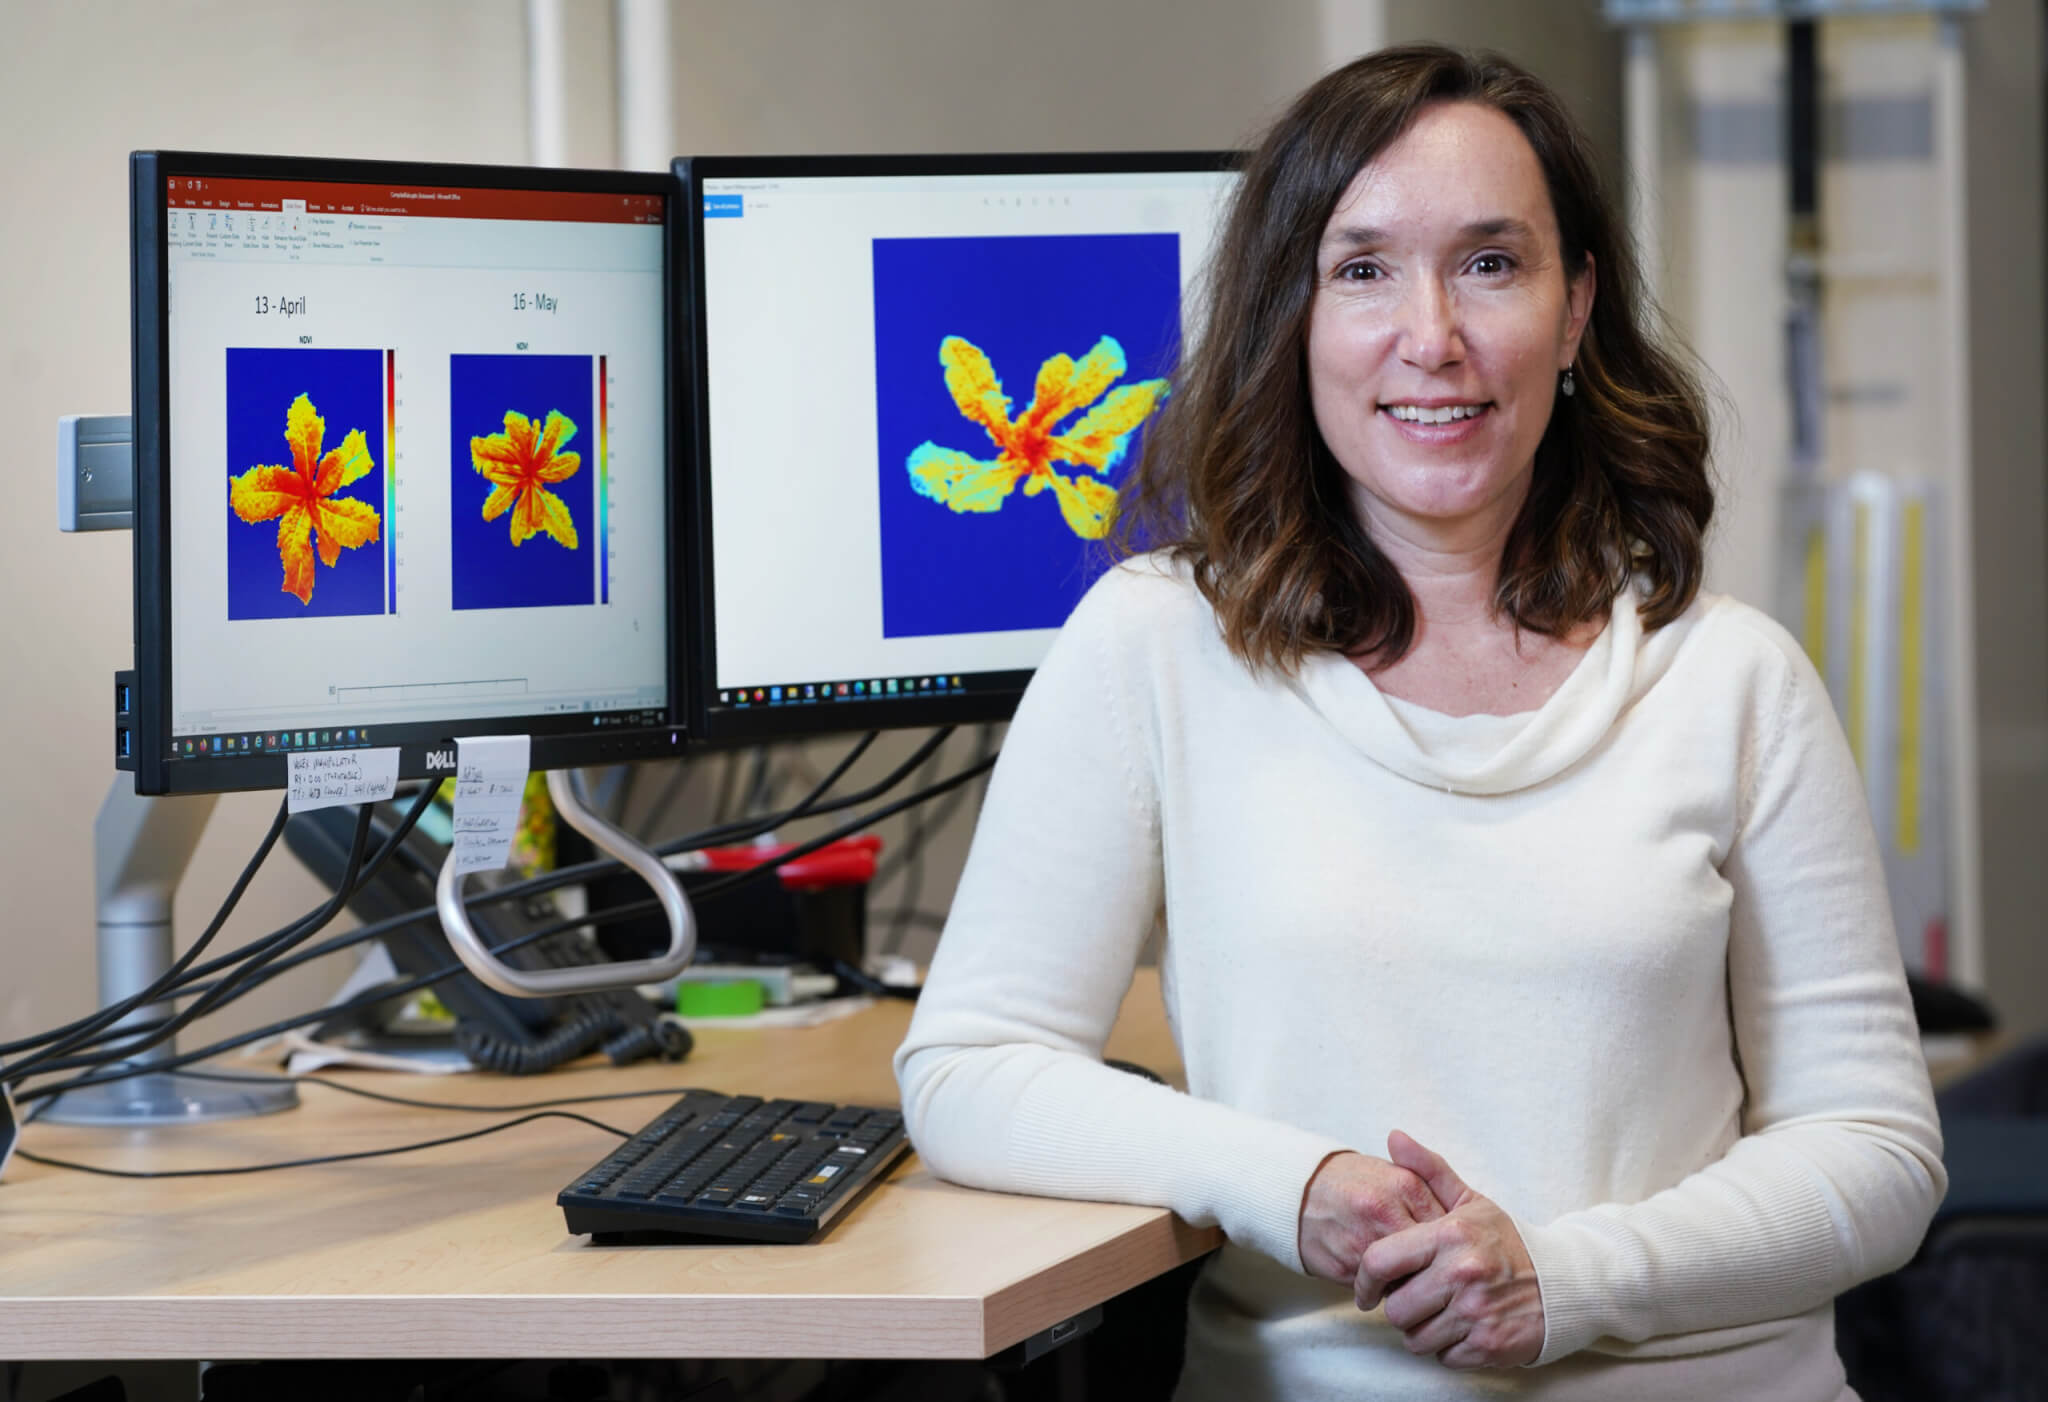 Lori Hoagland, professor of horticulture and landscape architecture at Purdue University, used advanced hyperspectral imaging to detect toxic metal stress in basil and kale in her work to improve food safety. (Purdue University photo/Tom Campbell)